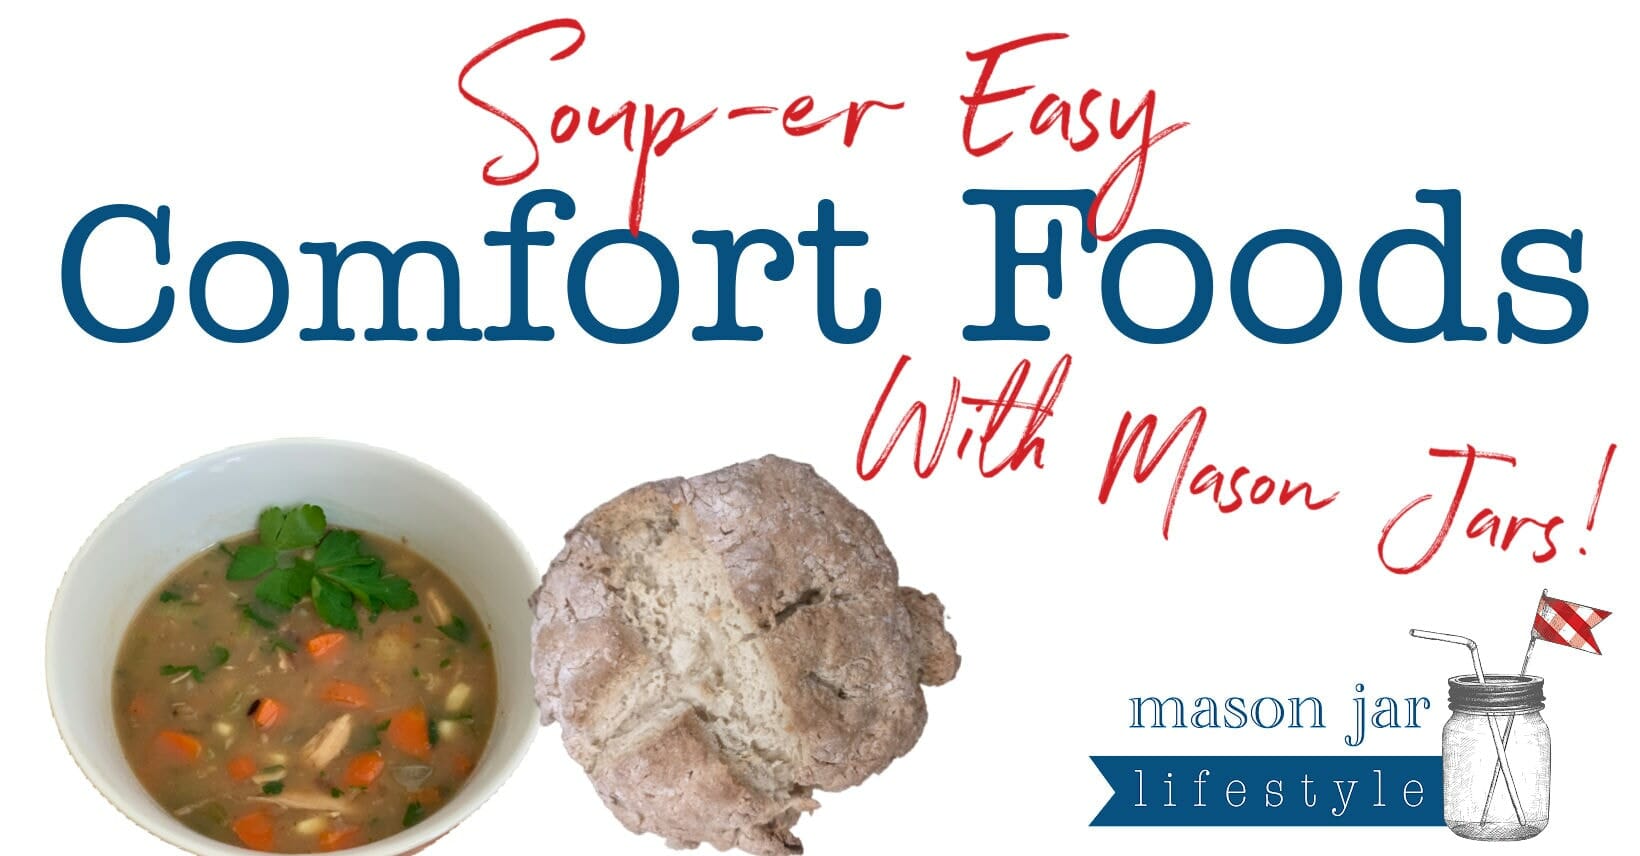 soup-er easy comfort foods with mason jars blog banner homemade from scratch chicken and wild rice soup Irish soda bread super